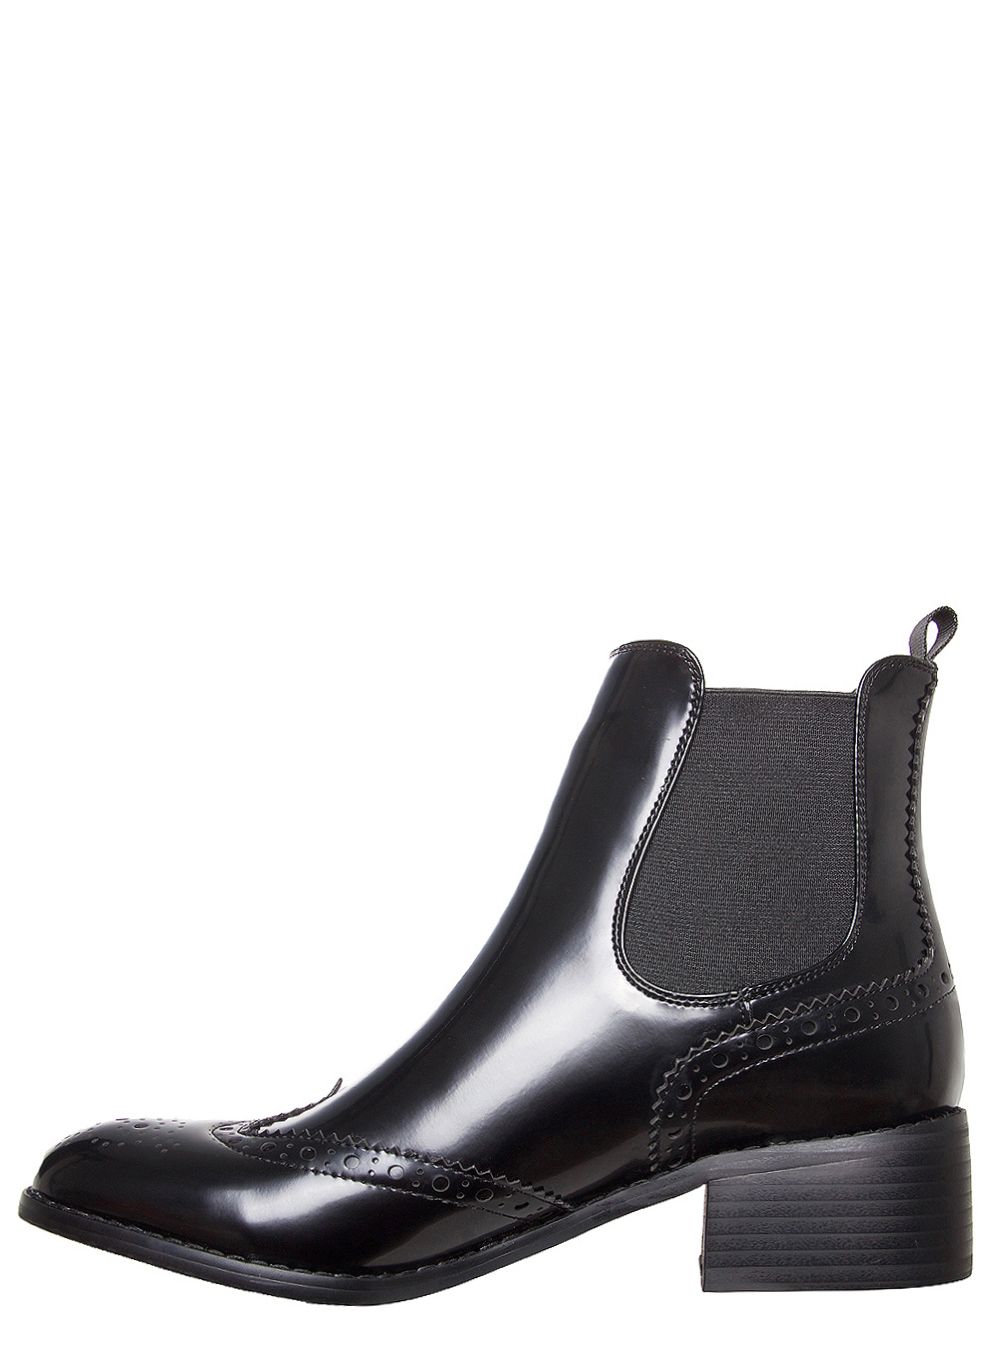 Layla Black Brogue Ankle Chelsea Boots